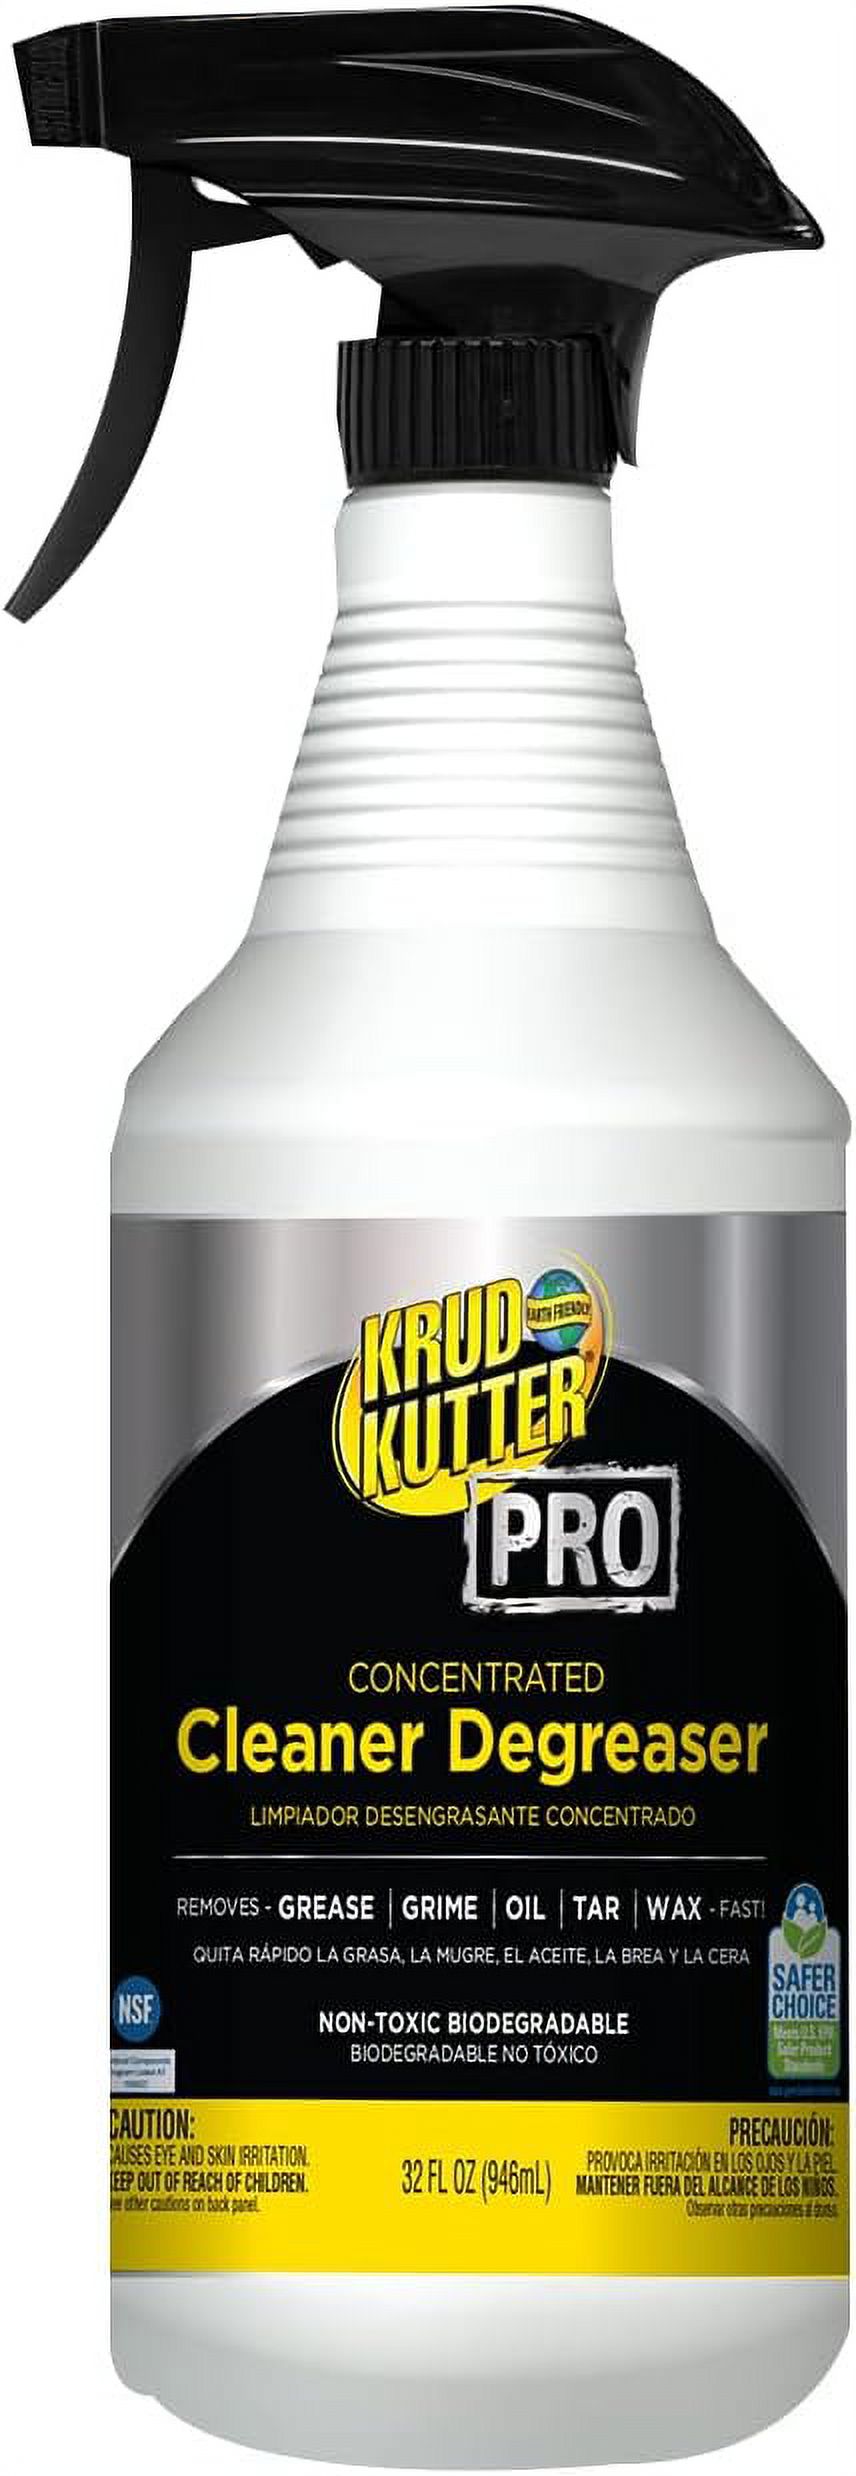 Krud Kutter Pro Cleaner Degreaser - Concentrate Spray - 32 oz (2 lb) - 1 Each - Clear - image 1 of 6